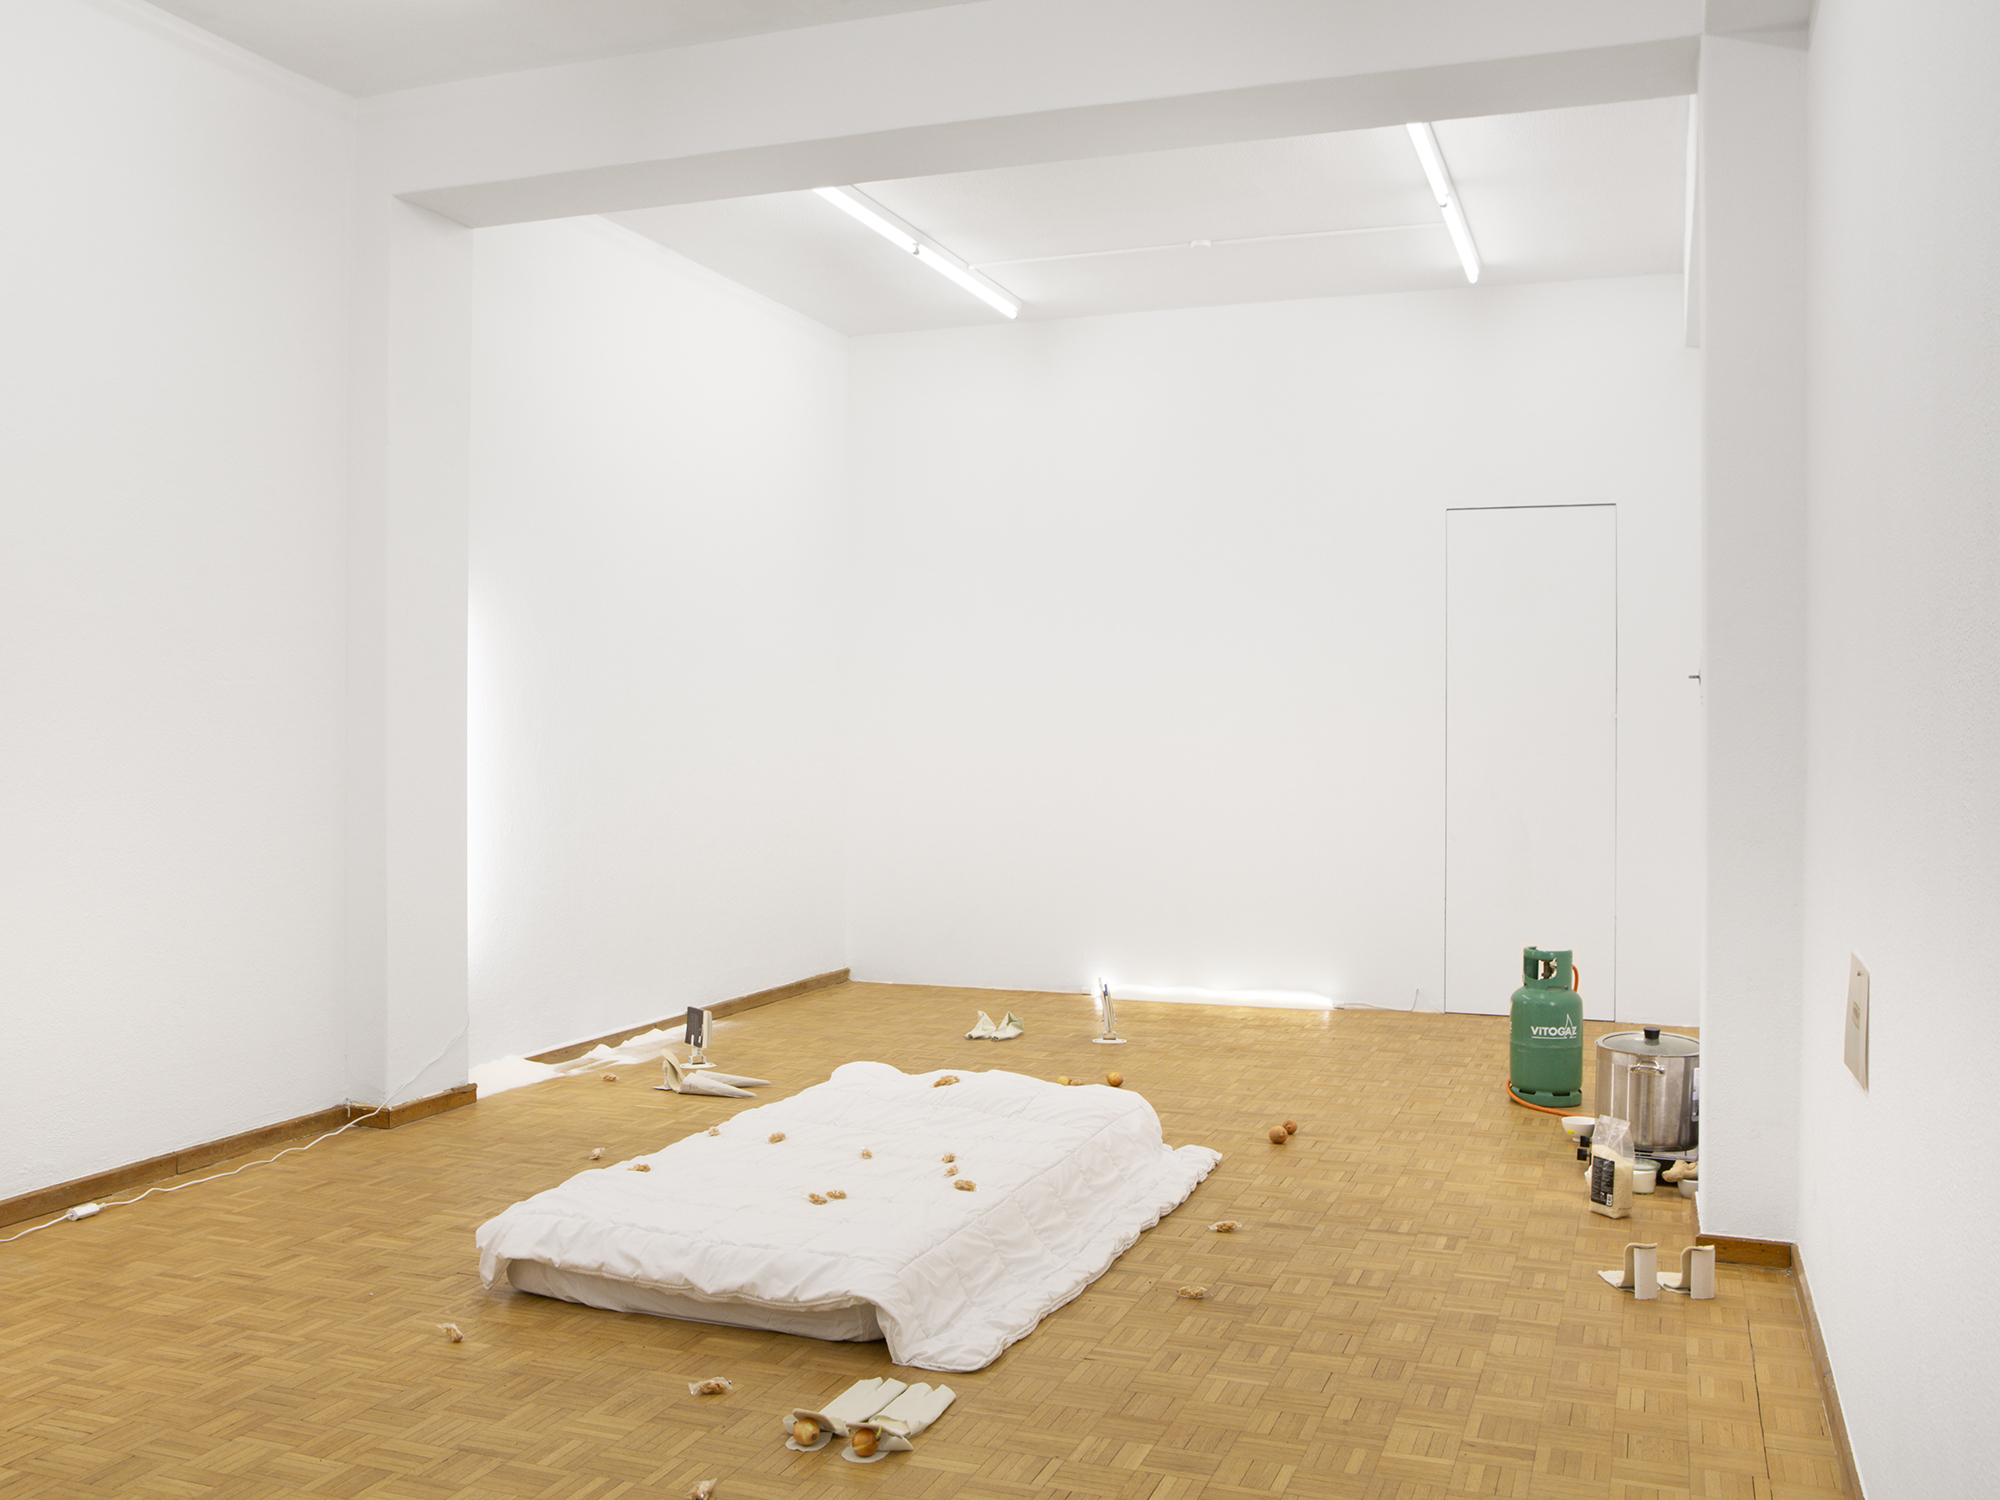 Economy of Means, CÃ©line Mathieu, Installation View